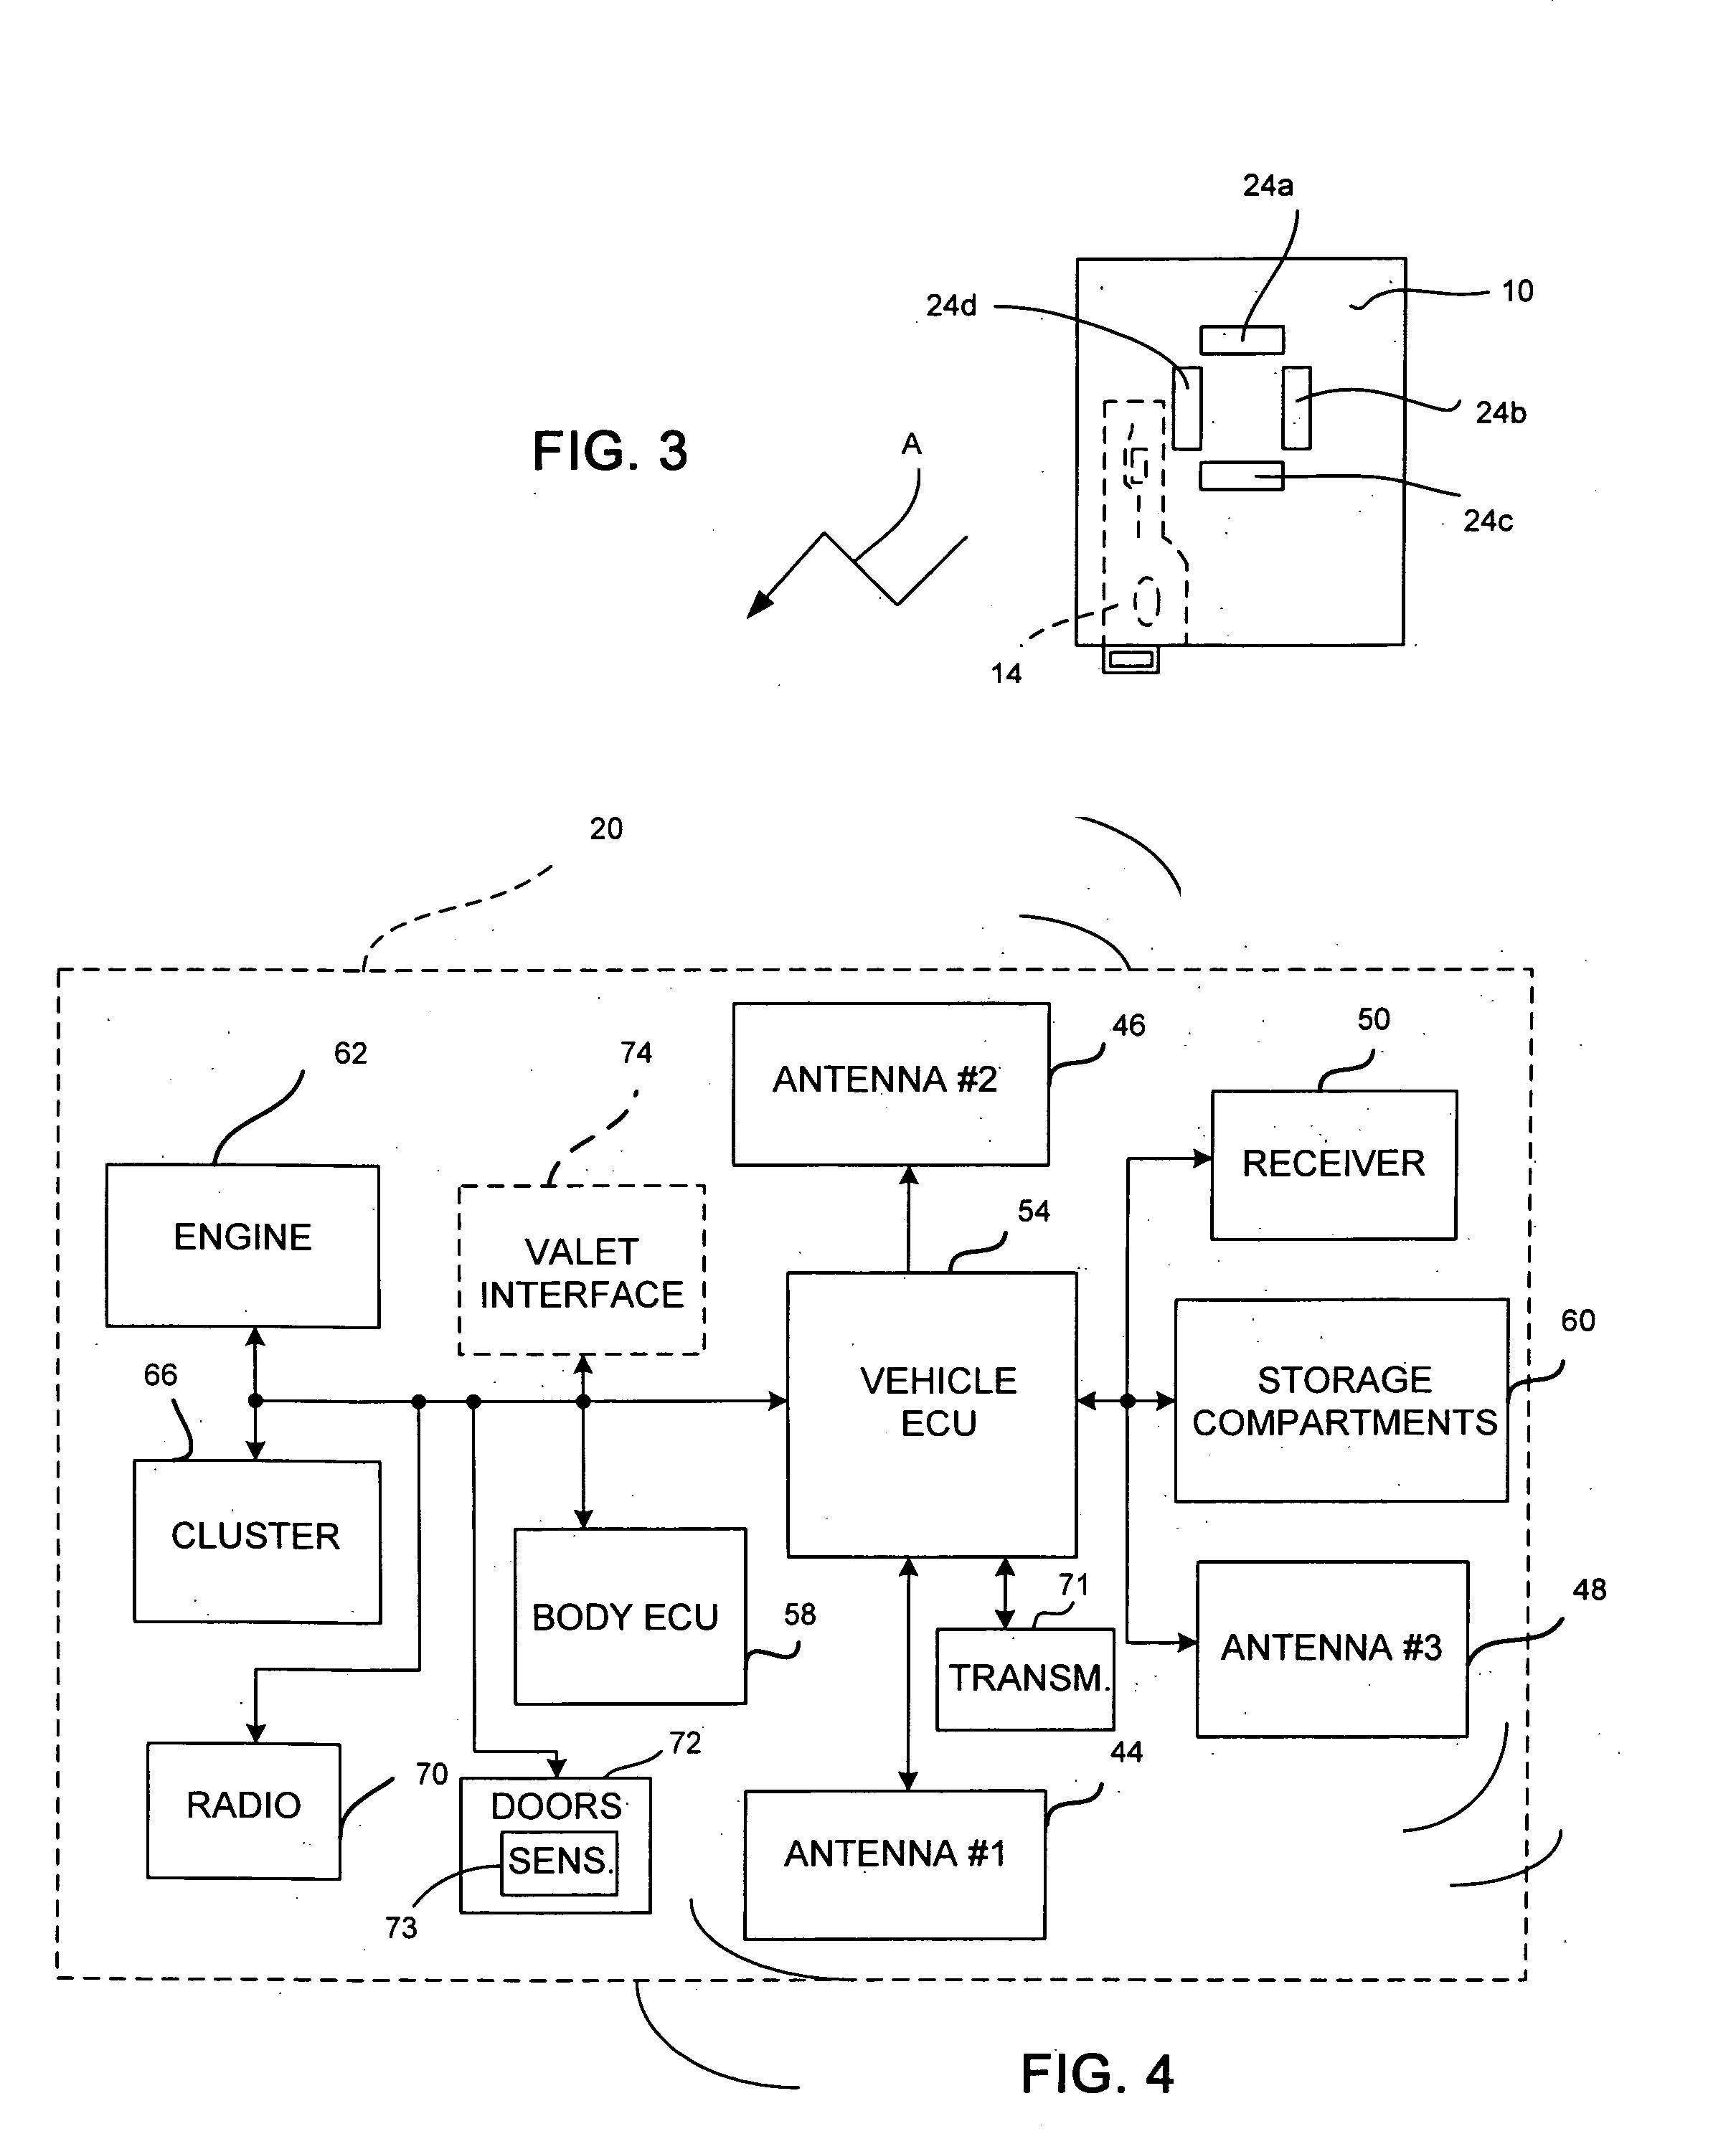 System for controlling a valet mode of a vehicle